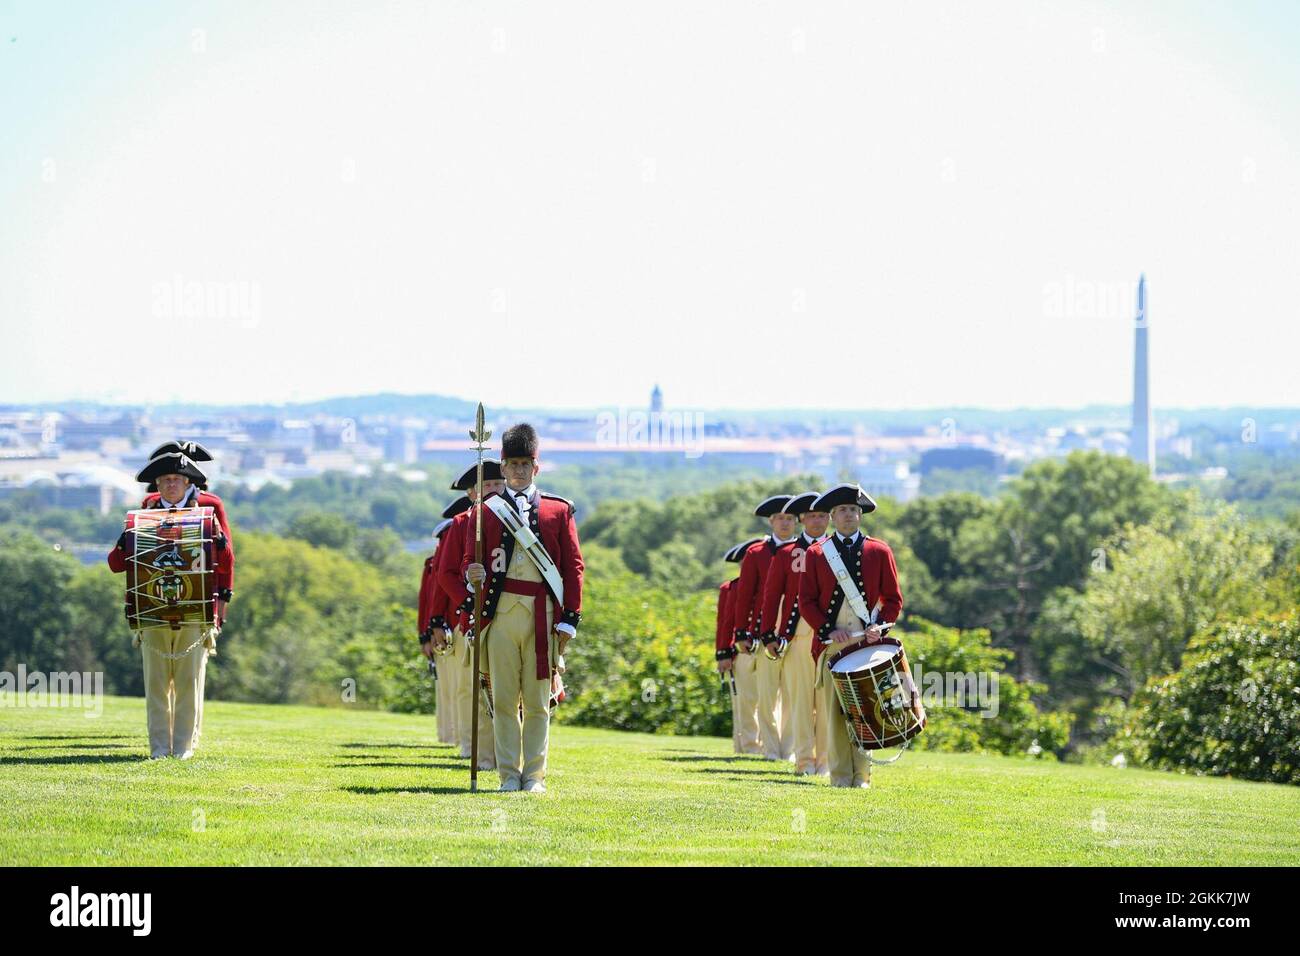 U.S. Soldiers assigned to the Fife and Drum Corps, 3rd U.S. Infantry Regiment (The Old Guard), participate in an Army Full Honor Arrival Ceremony in honor of General Sir Mark Alexander Carleton-Smith, the chief of the General Staff of the British Army, at Whipple Field, Joint Base Myer-Henderson Hall, Arlington, Va., May 13, 2021.   Chief of Staff of the U.S. Army Gen. James C. McConville hosted the event. Stock Photo